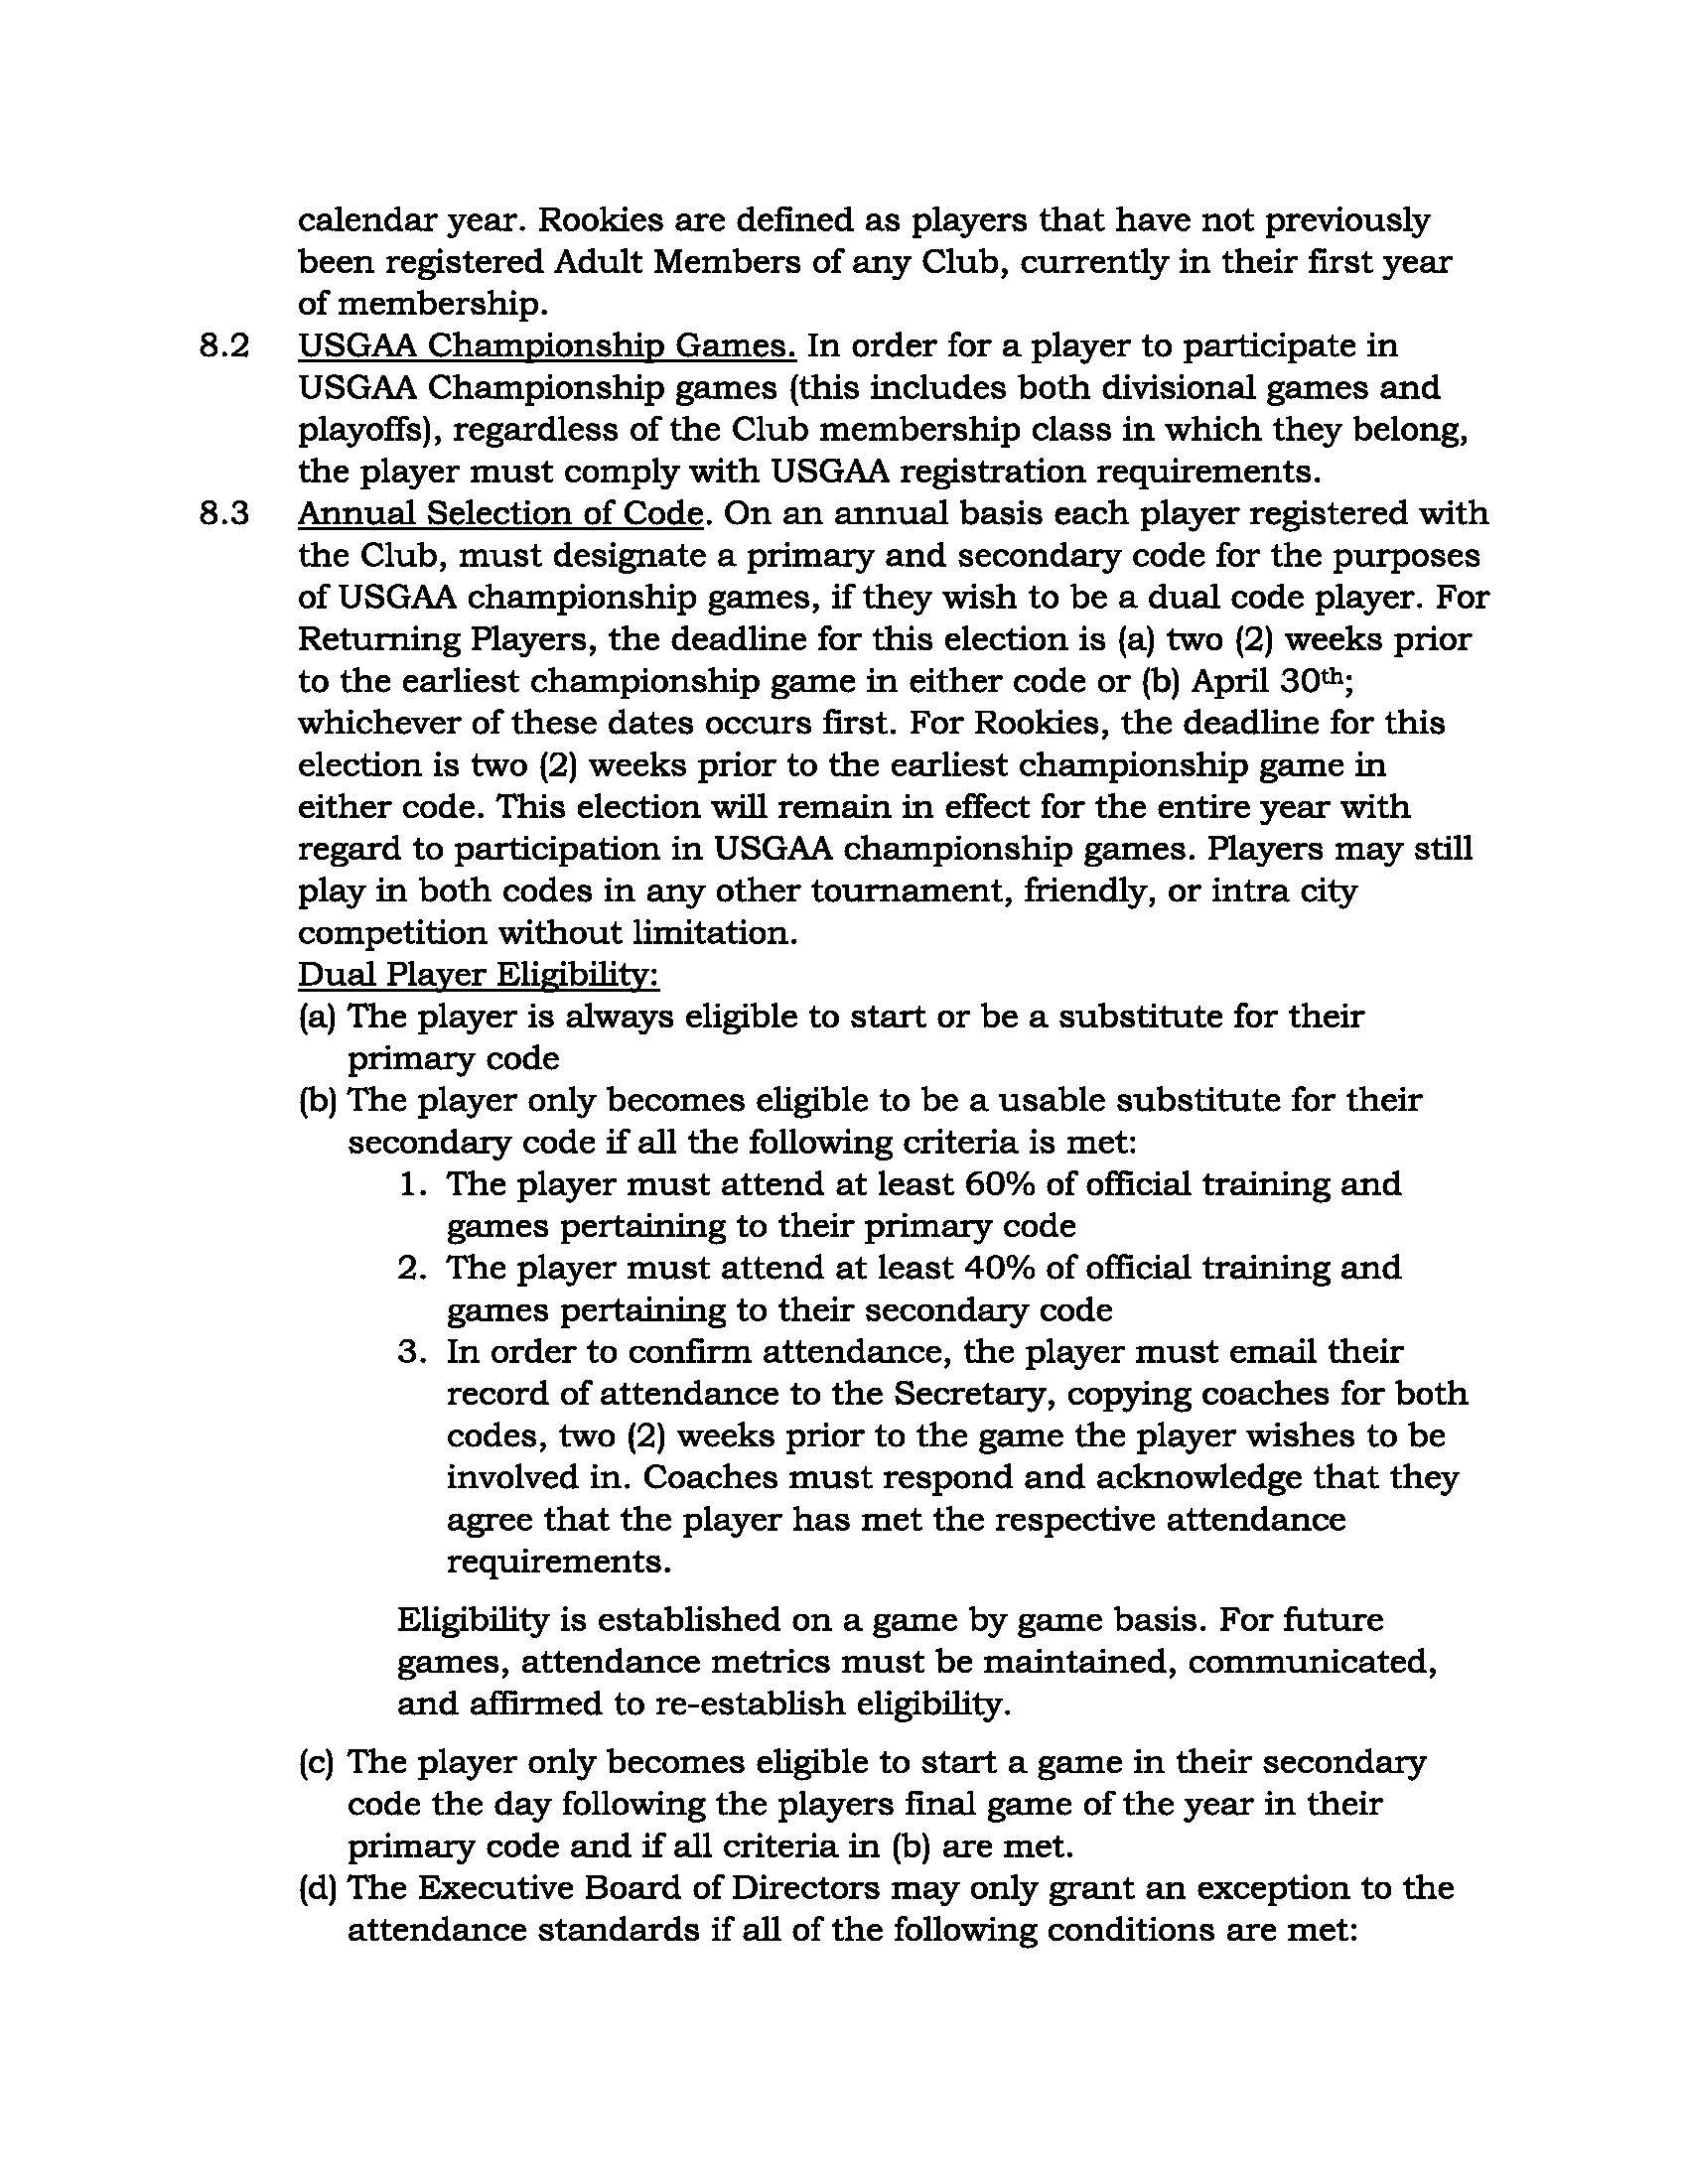 Bylaws of Charlotte James Connolly Gaelic Football Club_11.21.2022 - Signed_Page_13.jpg